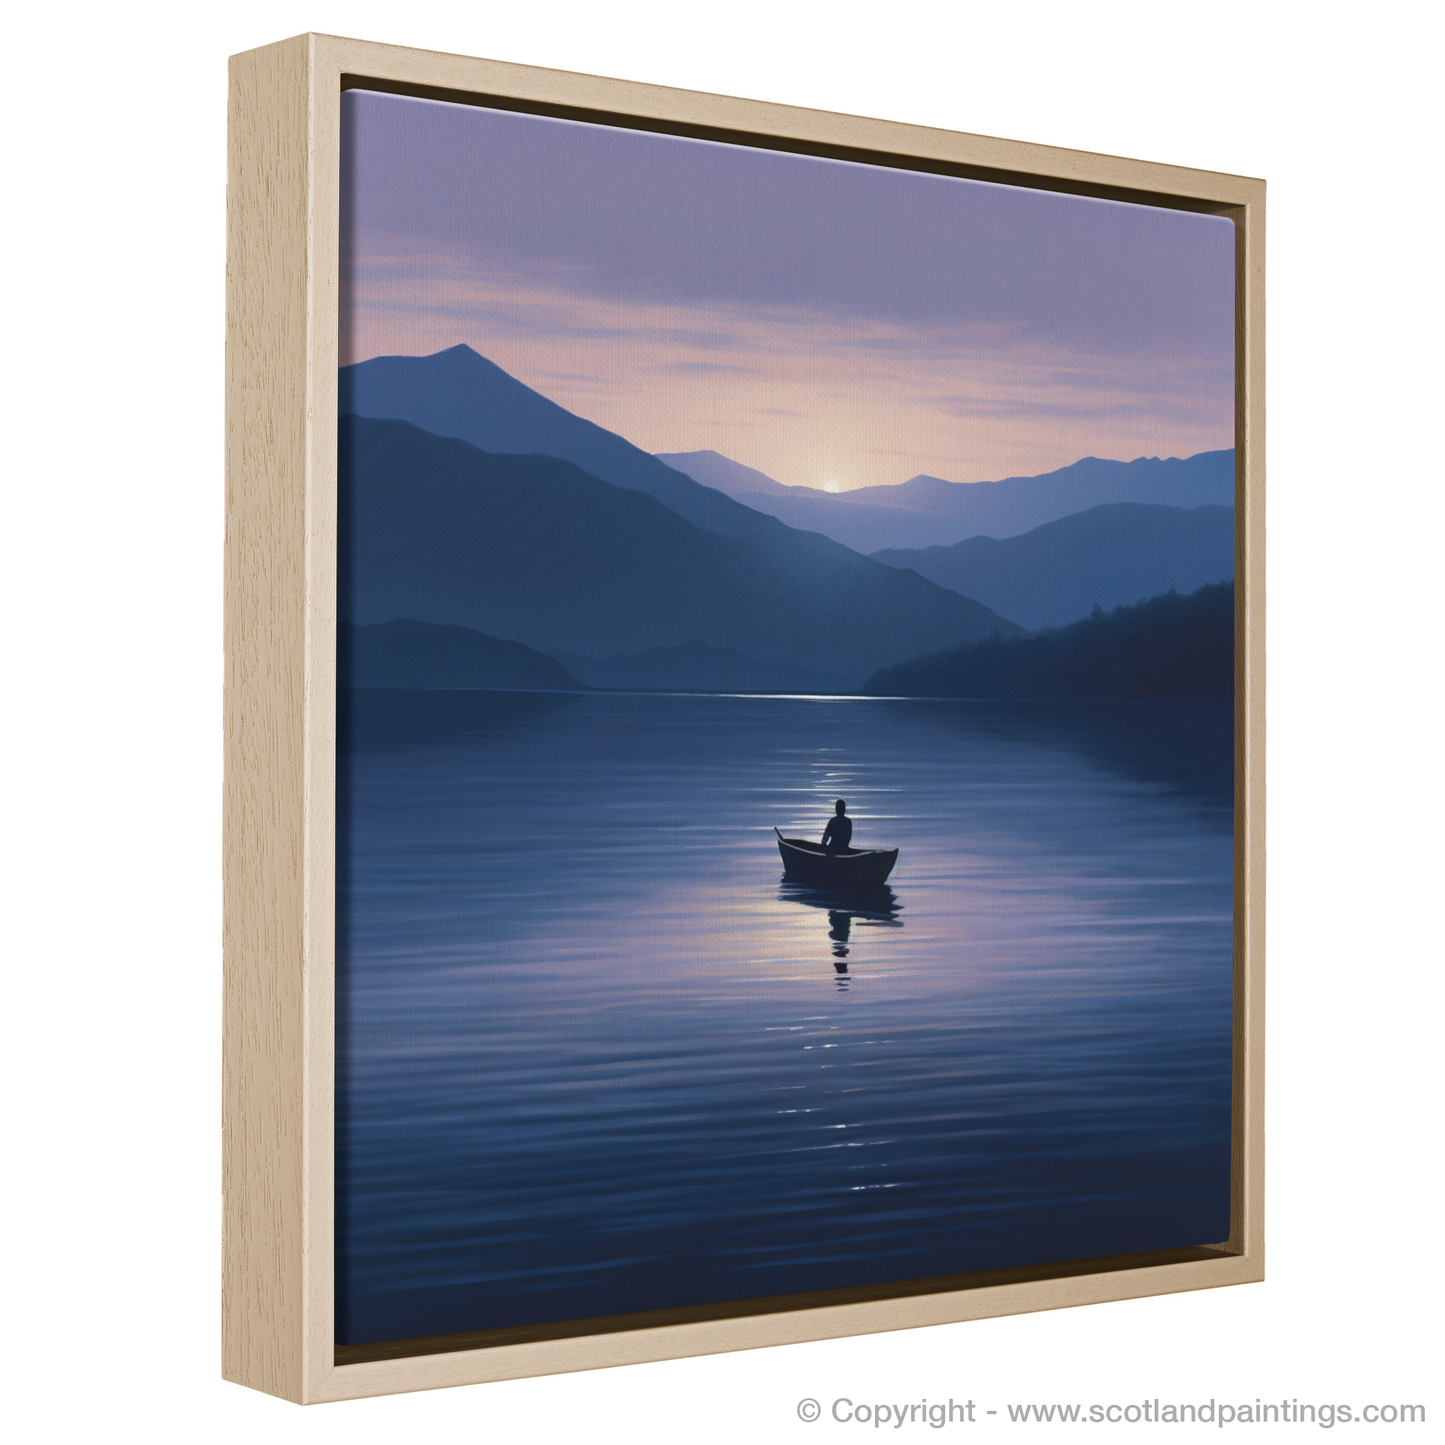 Painting and Art Print of Lone rowboat on Loch Lomond at dusk entitled "Twilight Serenity on Loch Lomond".